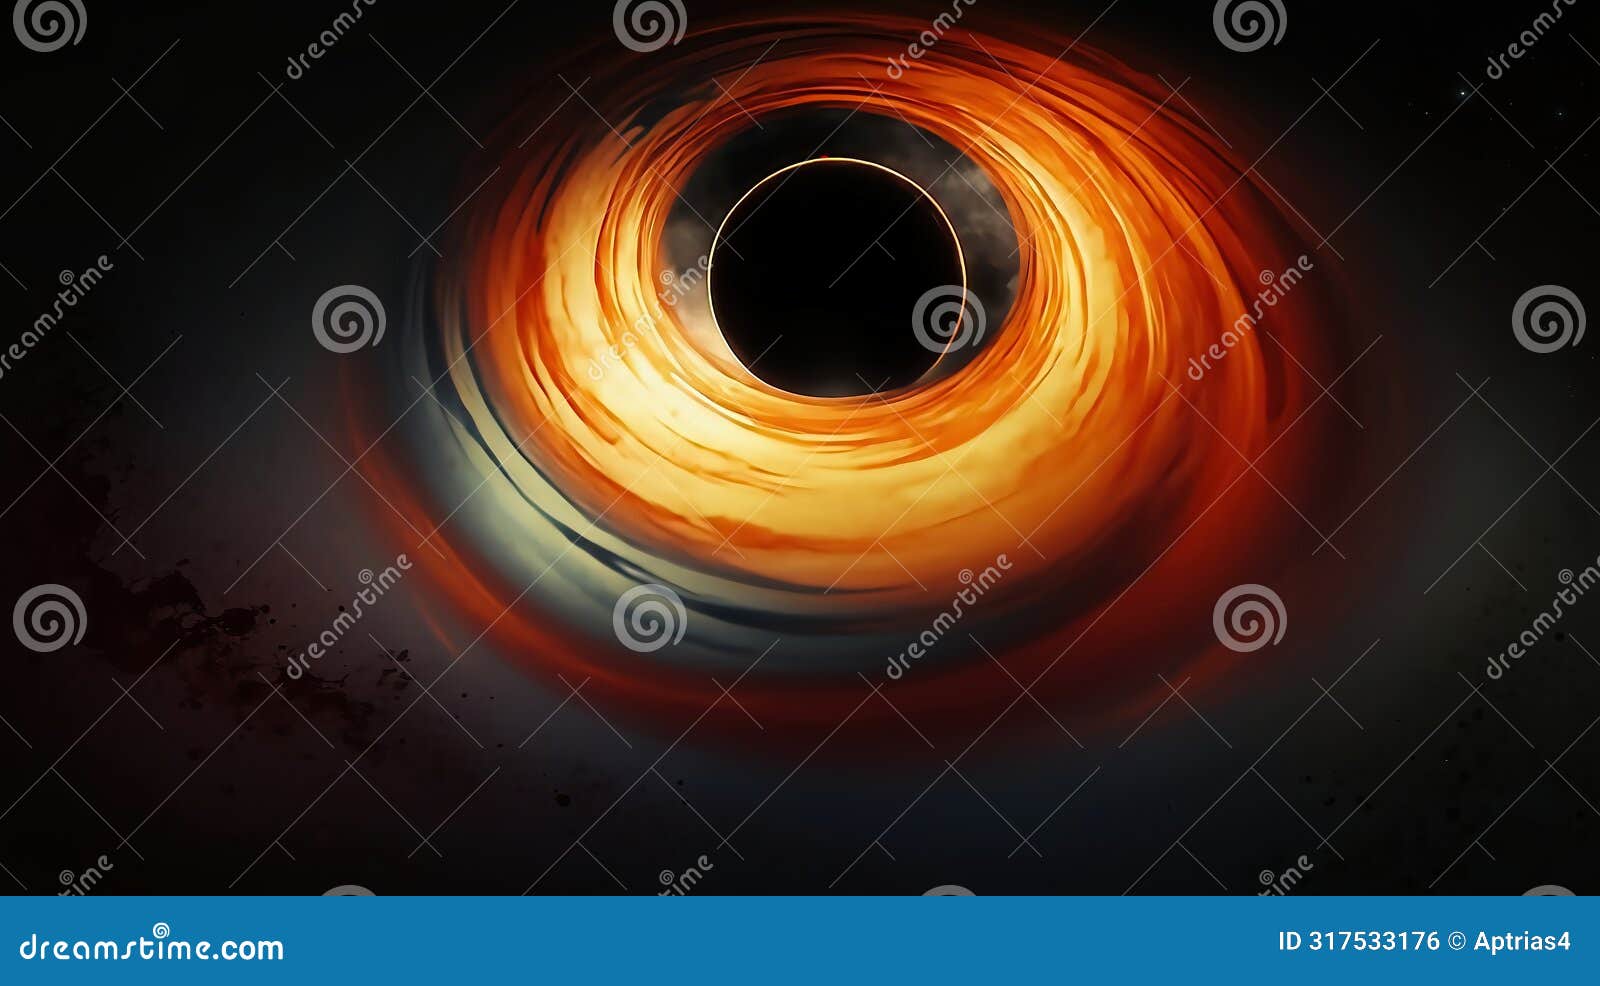 visualization of a black hole surrounded by an accretion disk in